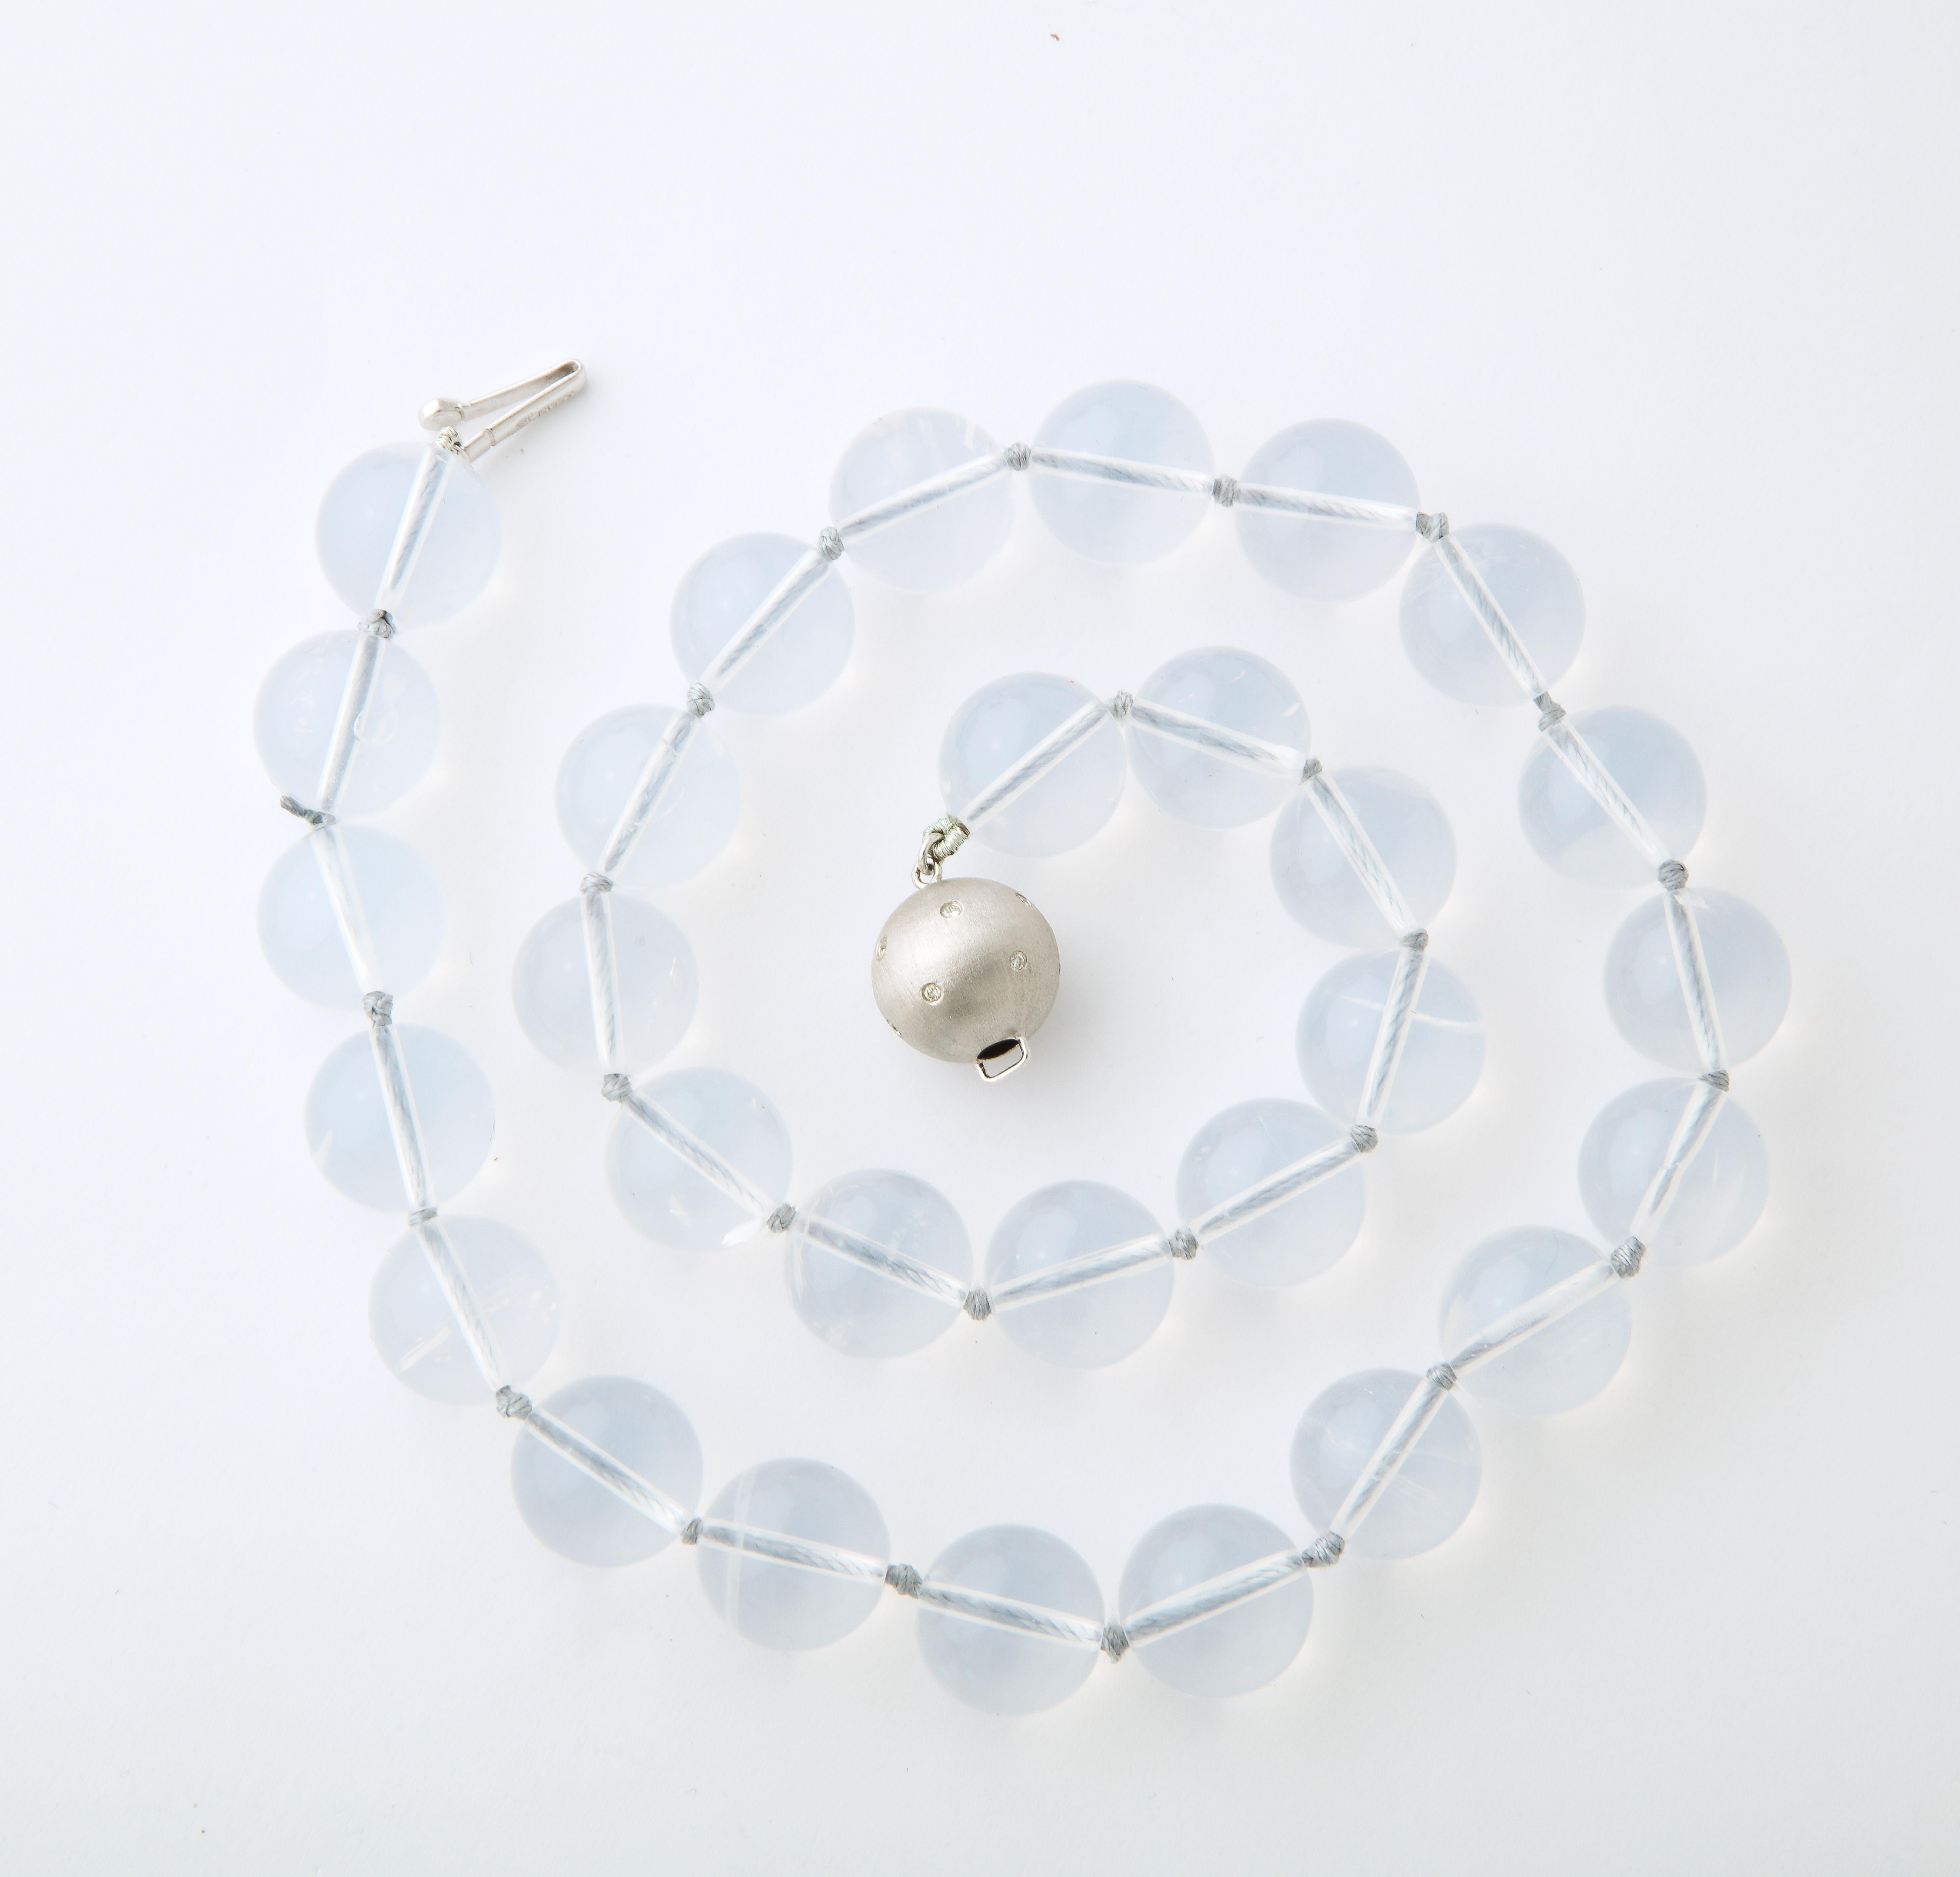 One Ladies Cool Iridescent Chalcedony Bead Necklace With An 18kt White Gold And Diamond Ball Clasp. Signed CH Makers Mark And Stamped 750 For 18kt Gold Mark.